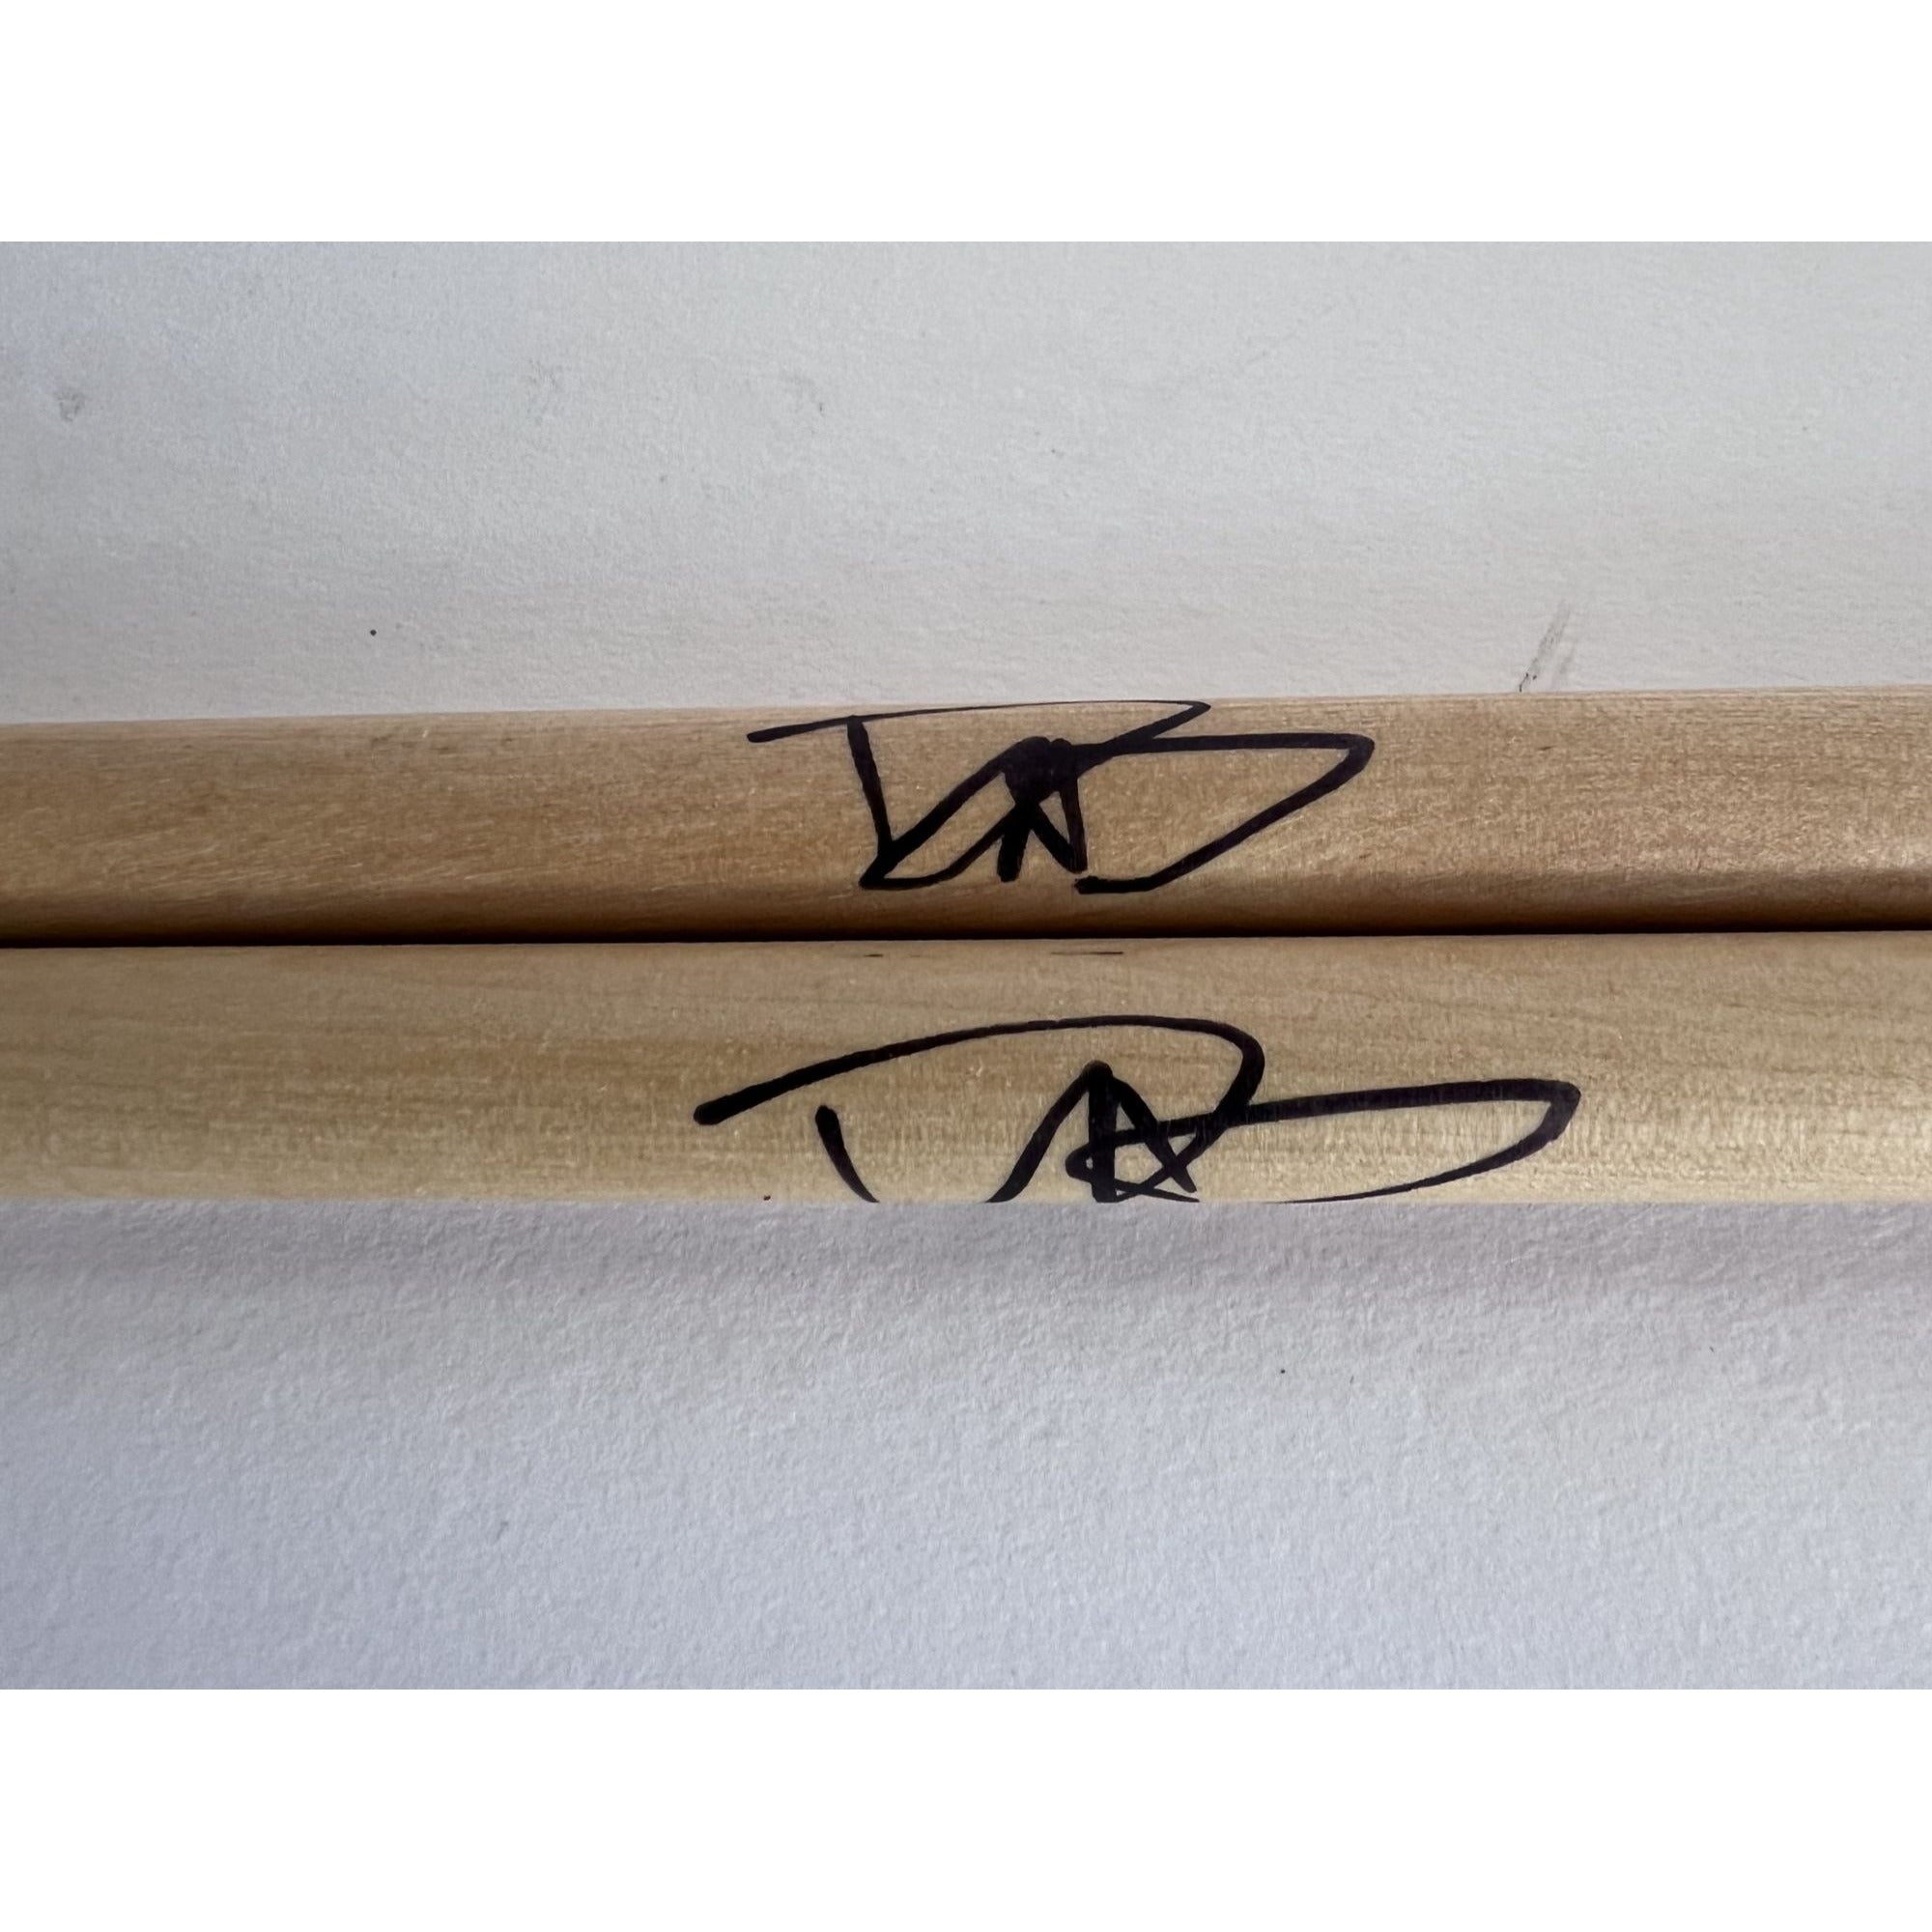 David Grohl Foo Fighters pair of drumsticks signed with proof